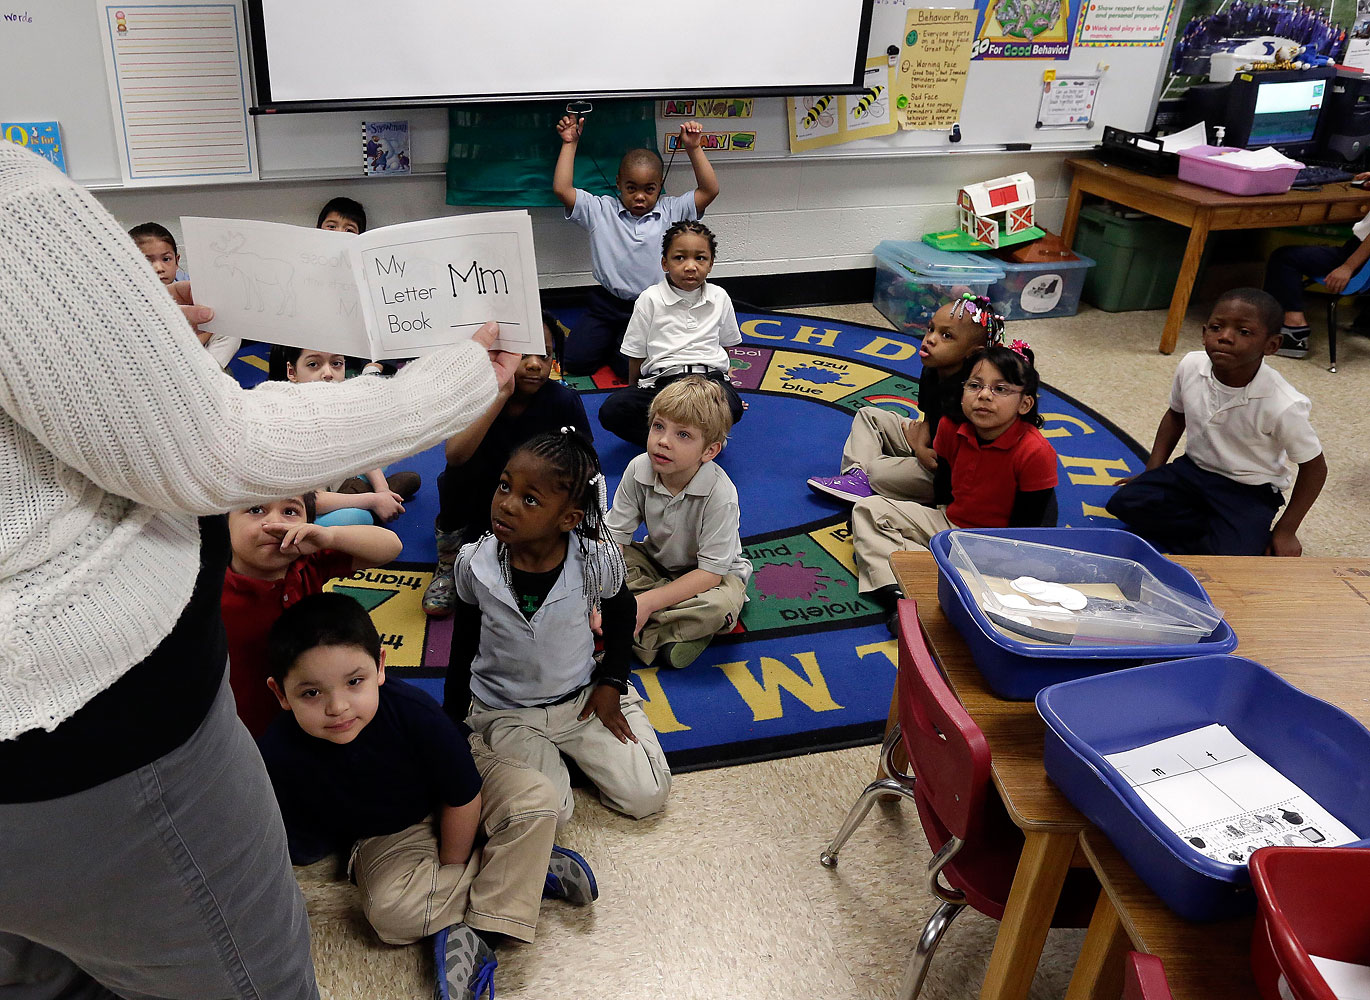 Kindergarten students at George Buck Elementary School in Indianapolis on March 25, 2014 (AJ Mast—AP)